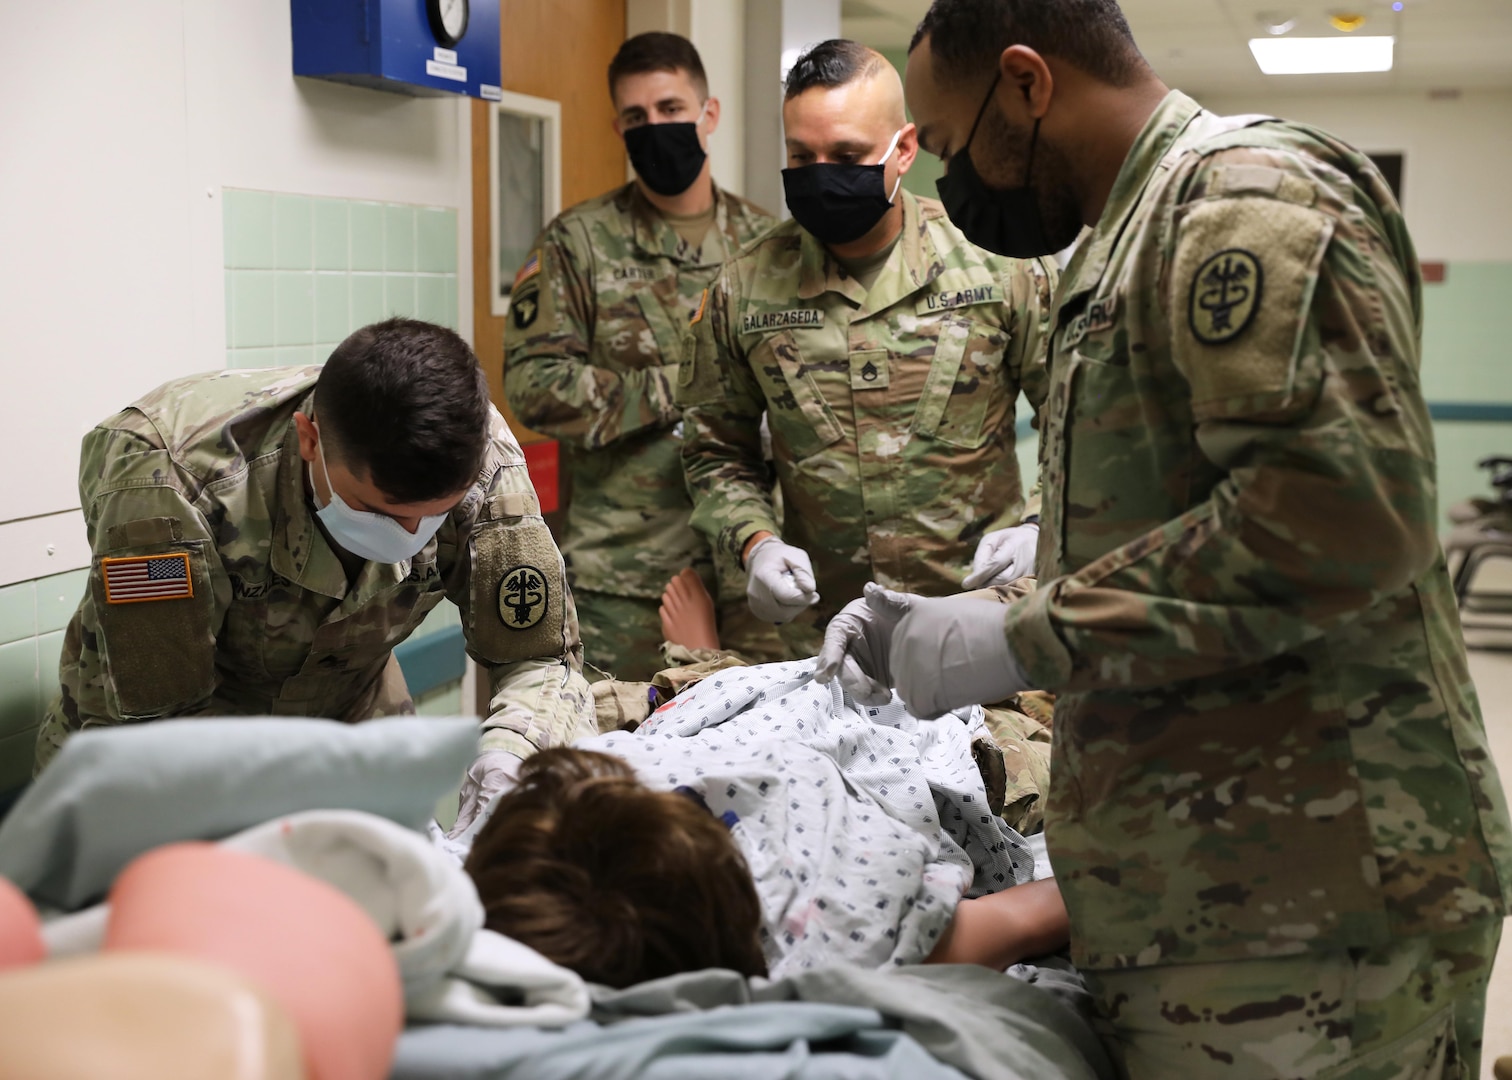 Five Soldiers completed the five-day Delayed Evacuation Casualty Management (DECM) course and learned critical care concepts preparing them to stabilize and sustain a casualty in an extended-care scenario before casualty evacuation.